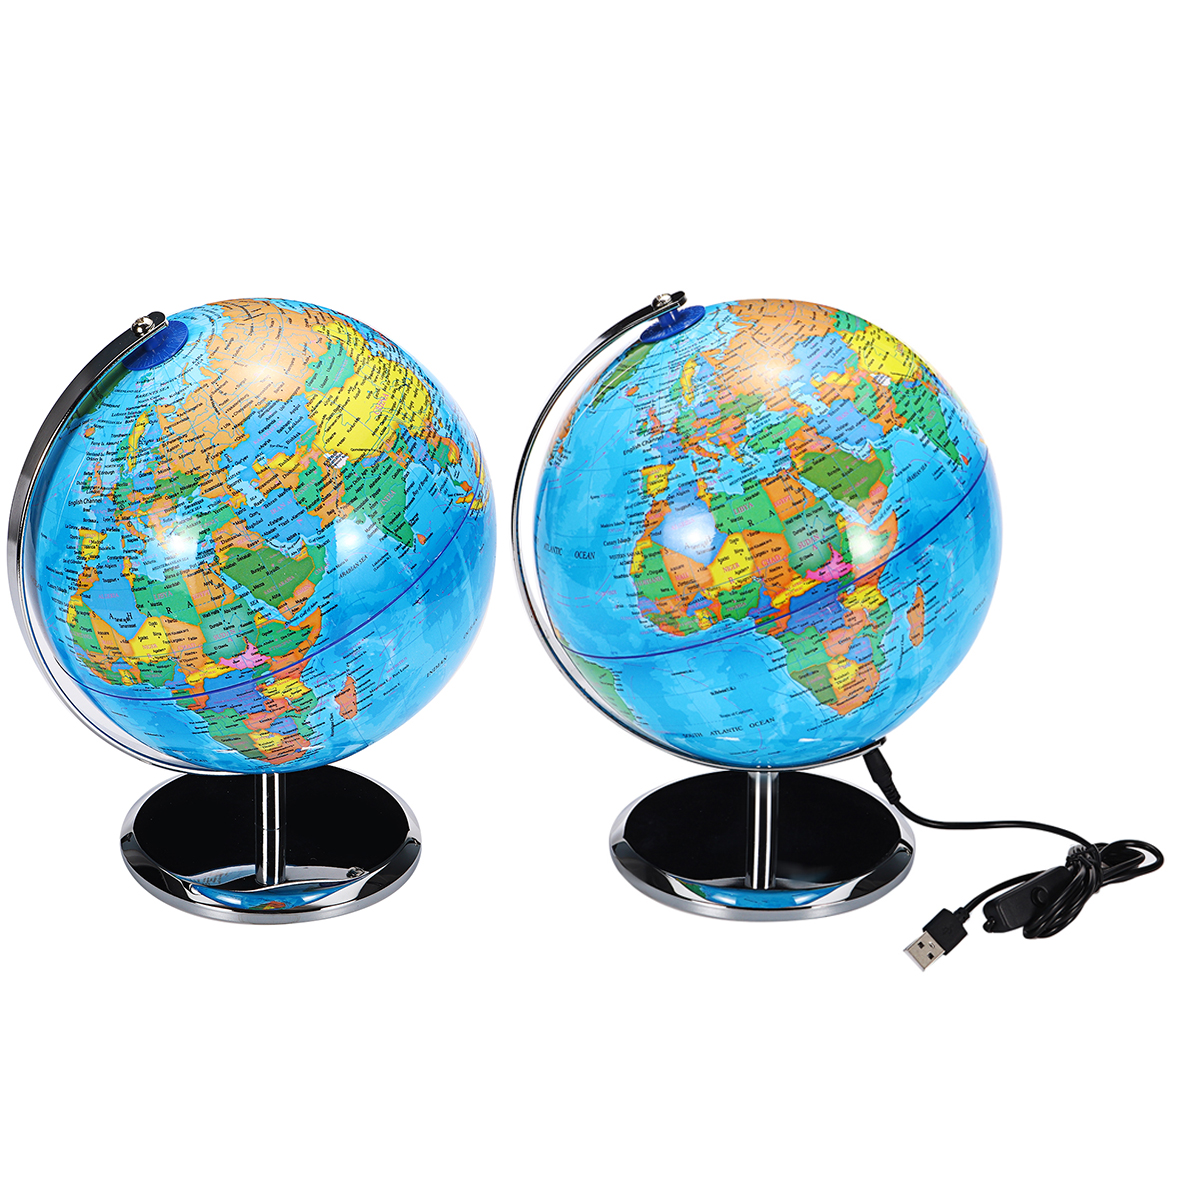 8inch-Stand-Rotating-World-Globe-Map-Kids-Toy-School-Student-Educational-Gift-1783975-4